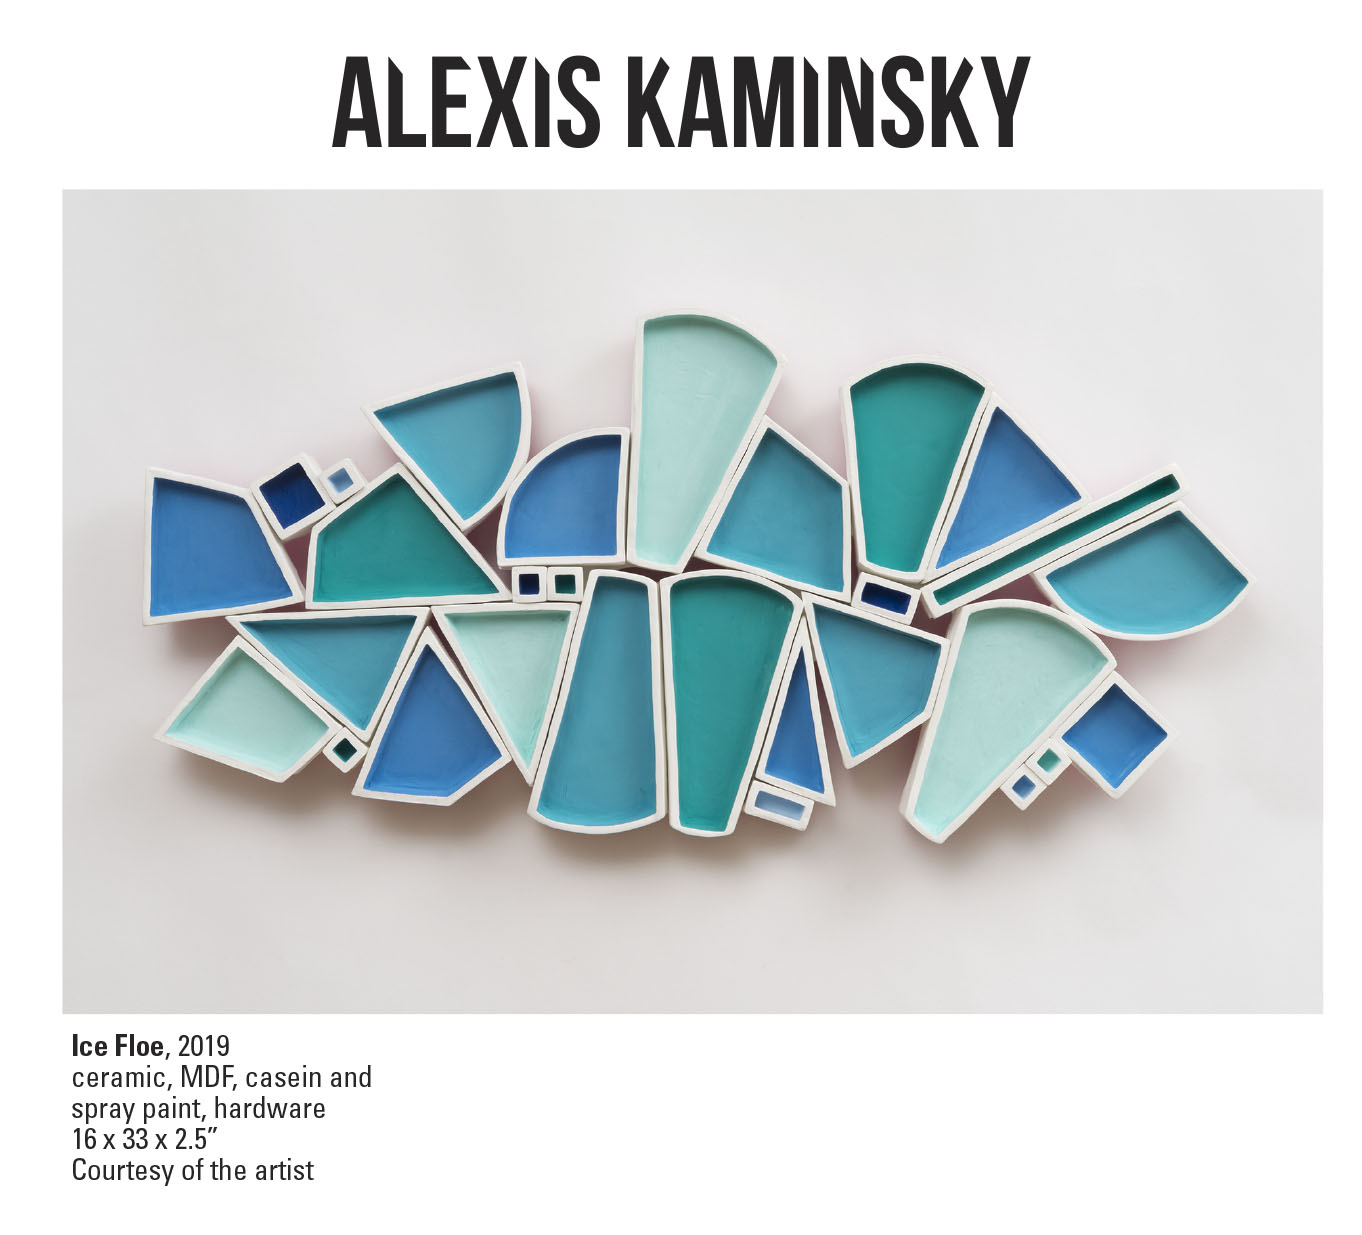 Alexis Kaminsky, Ice Floe, 2019. Ceramic, MDF, casein and spray paint, hardware. 16 x 33 x 2.5” Courtesy of the artist. A sculpture of various triangular and rounded rectangle shapes in blue tones